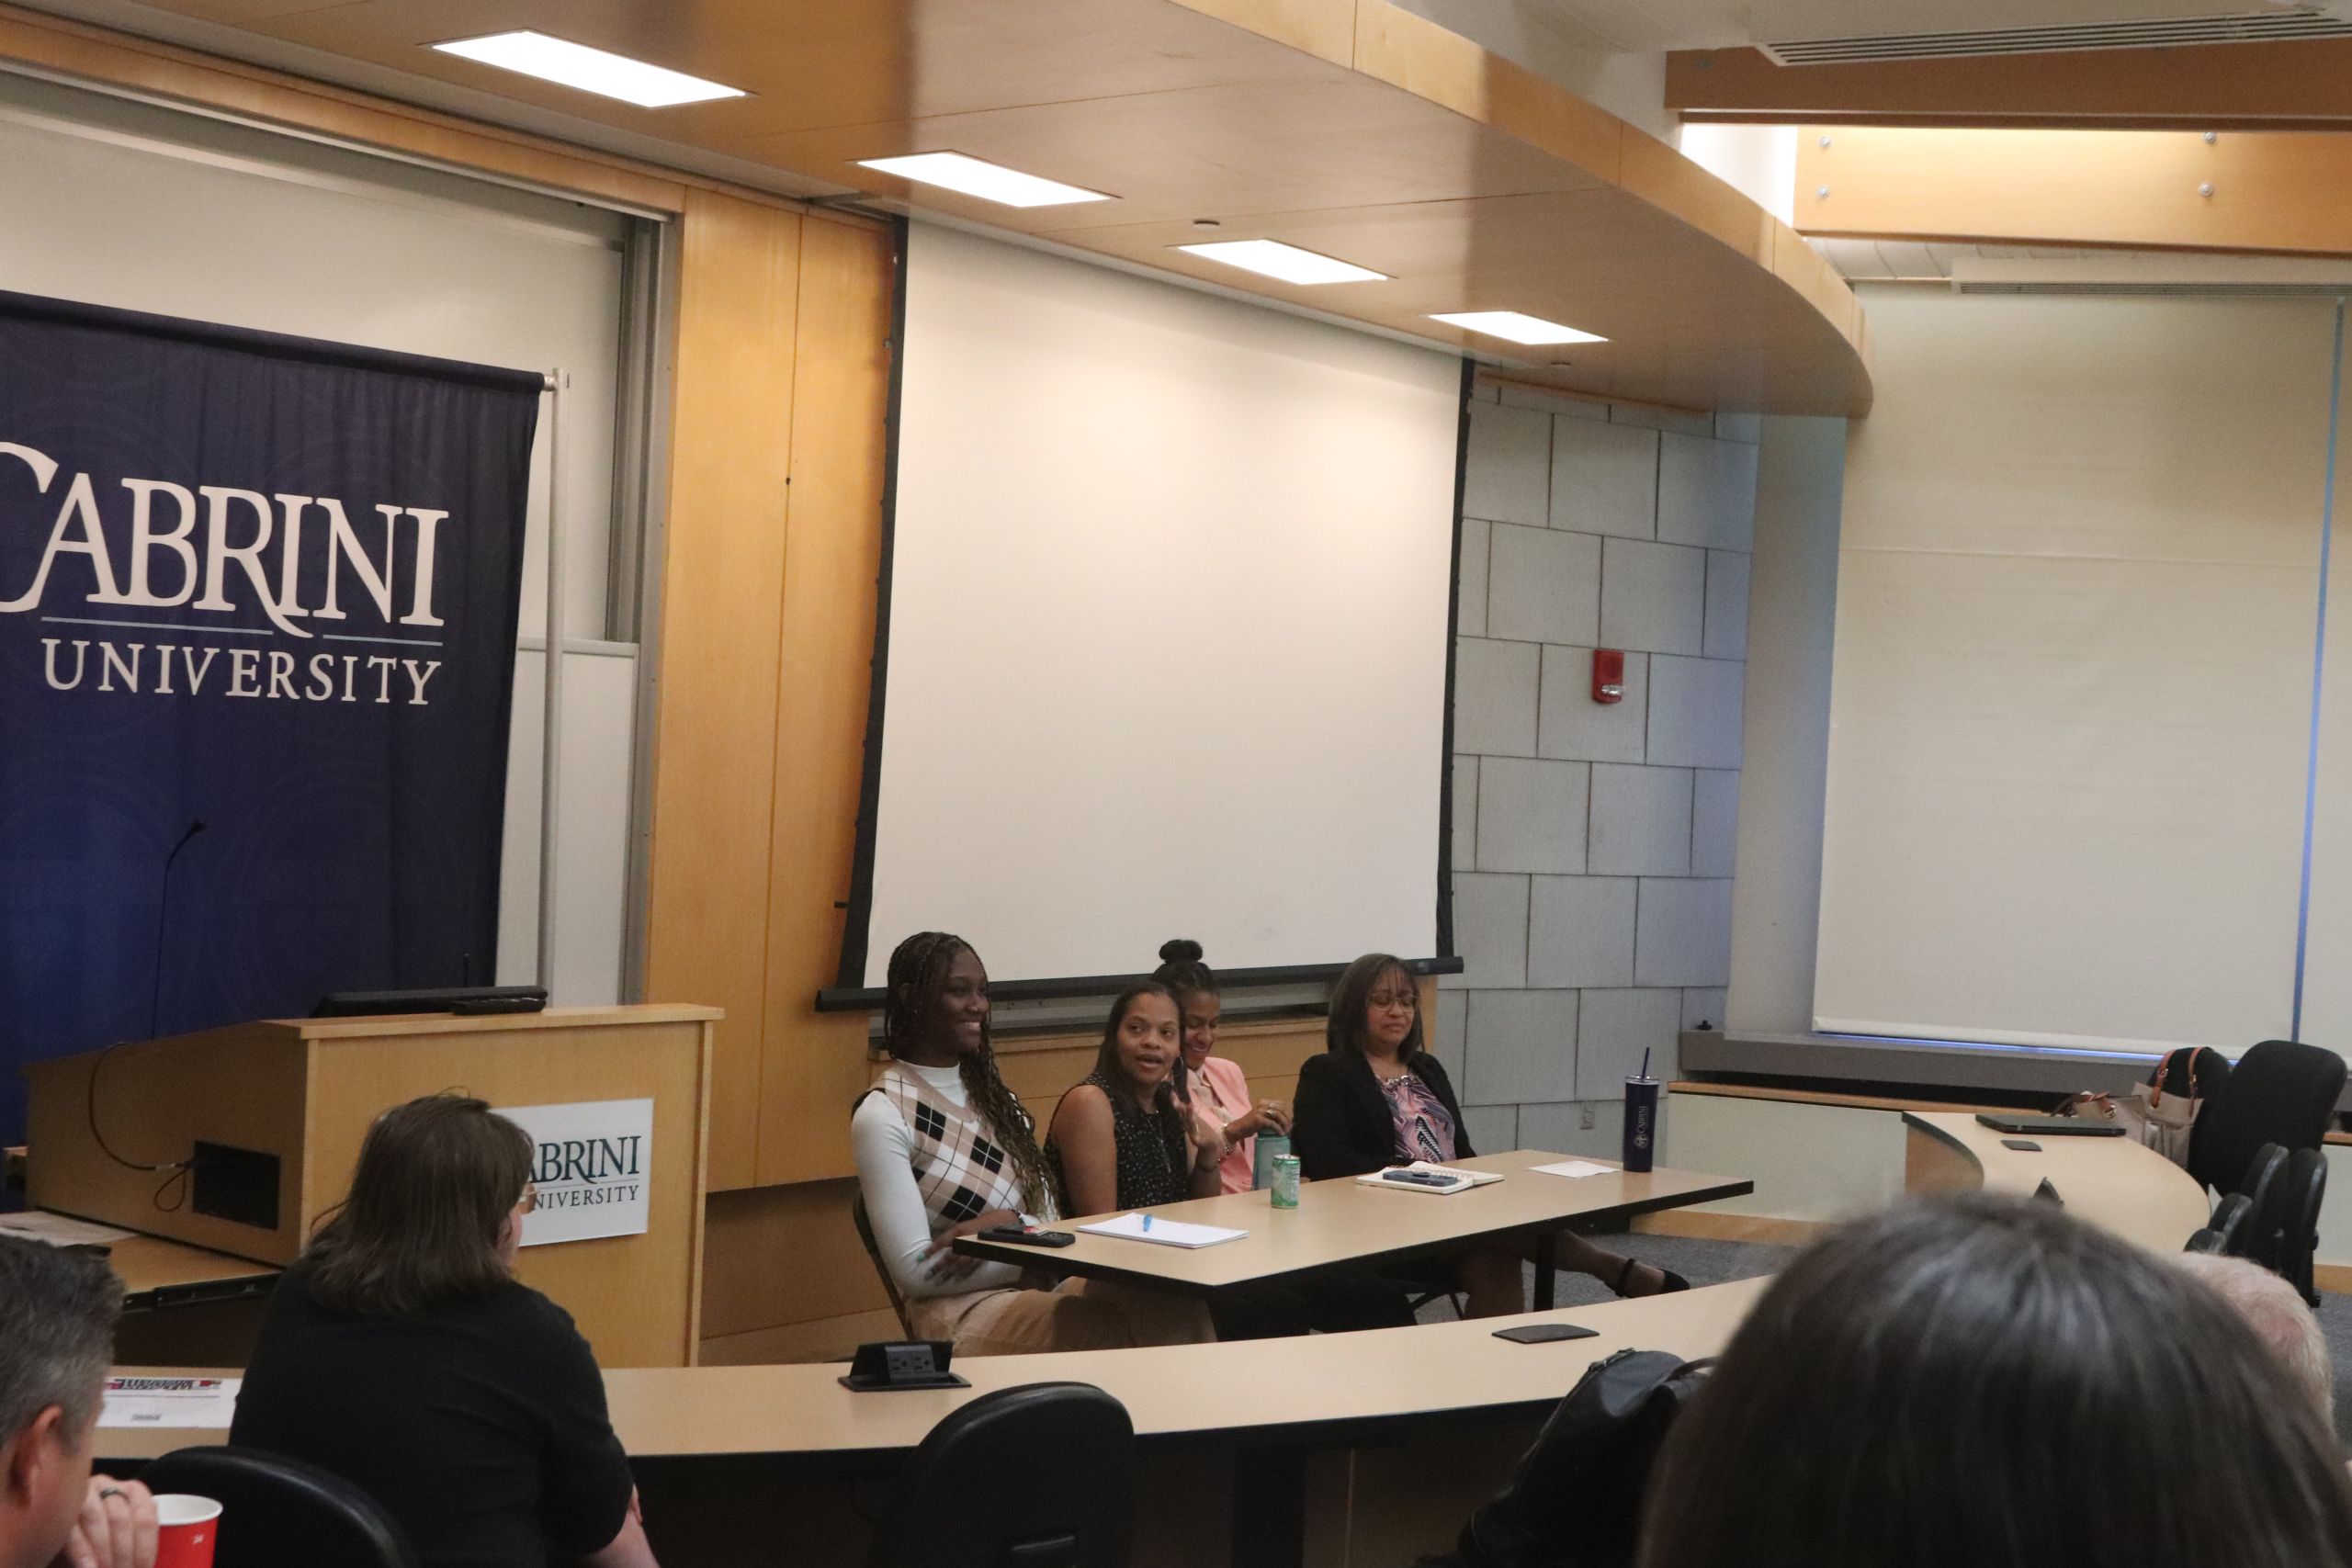 The event panel (left to ride); Reyani Perryman, Nikki Gillum-Clemons, Dr. Vivian Smith, and Angelica Martinez answer questions from students. Photo by Skyler Kellers.